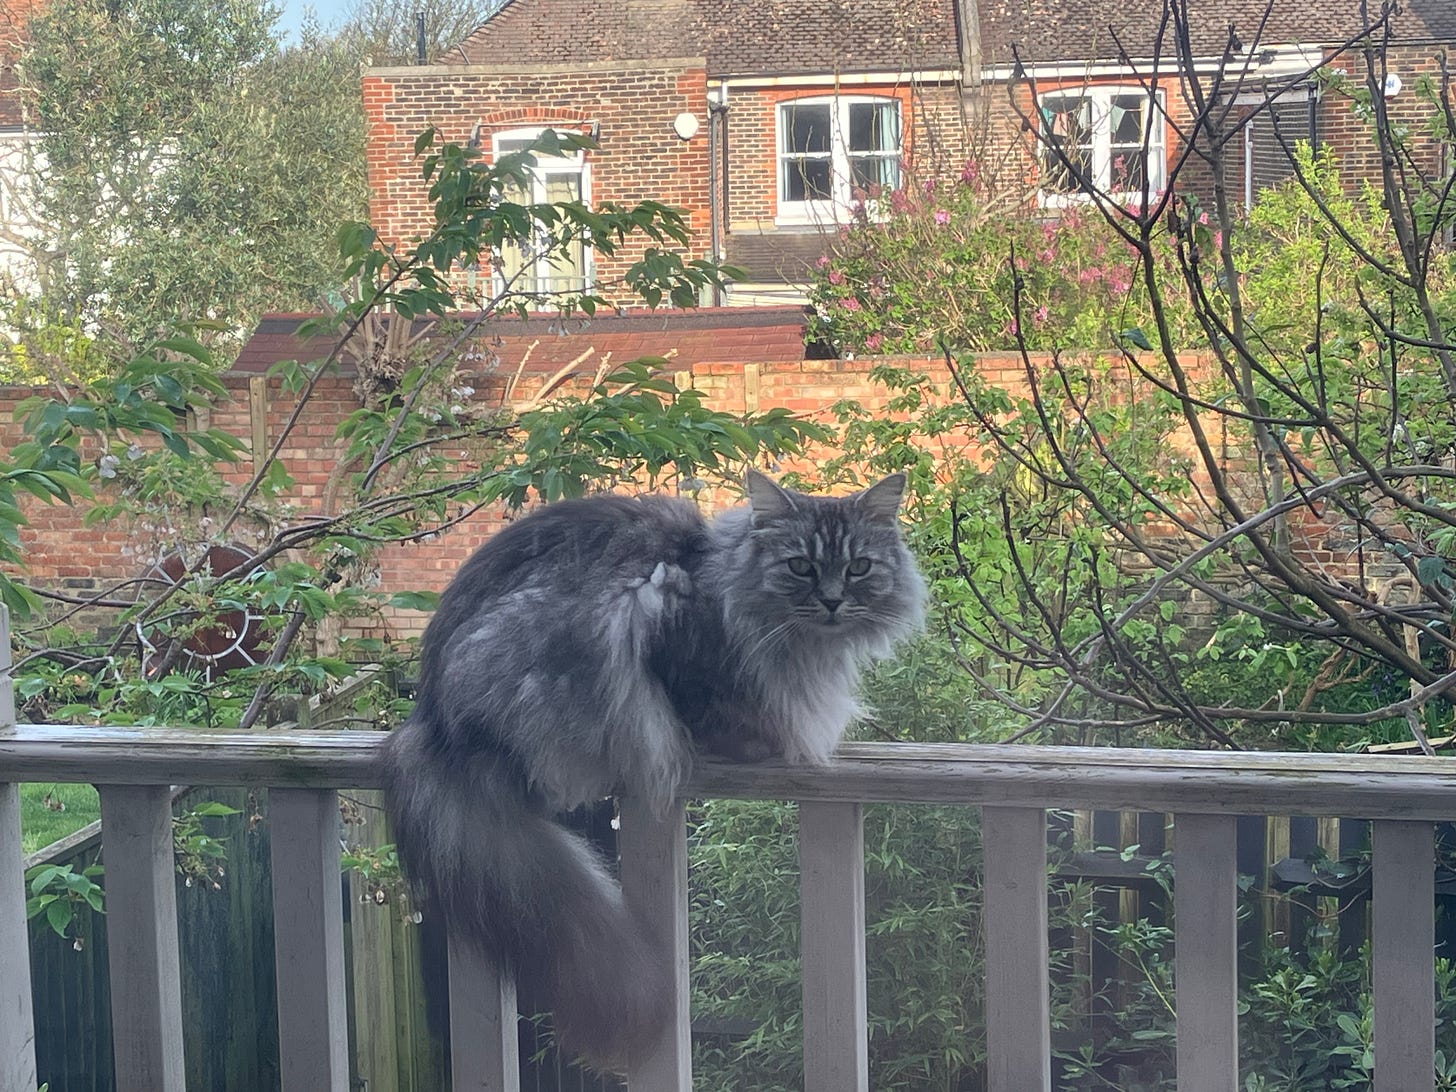 Grey cat on a railing with green trees and a brick house in the background.